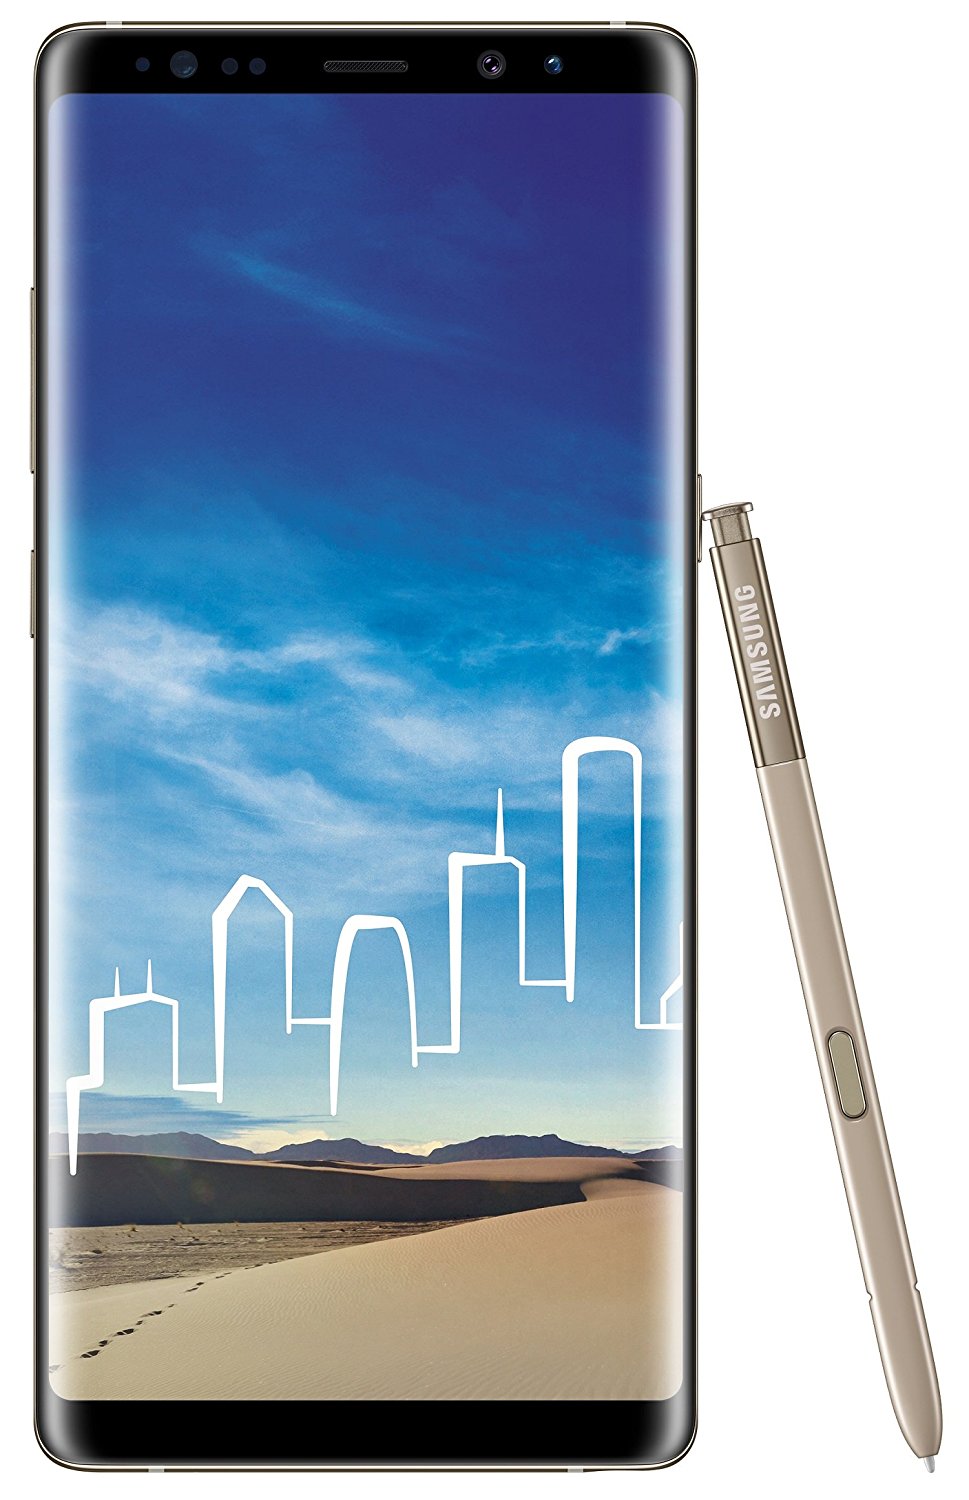 Galaxy Note 8 Rs 43990/- Only